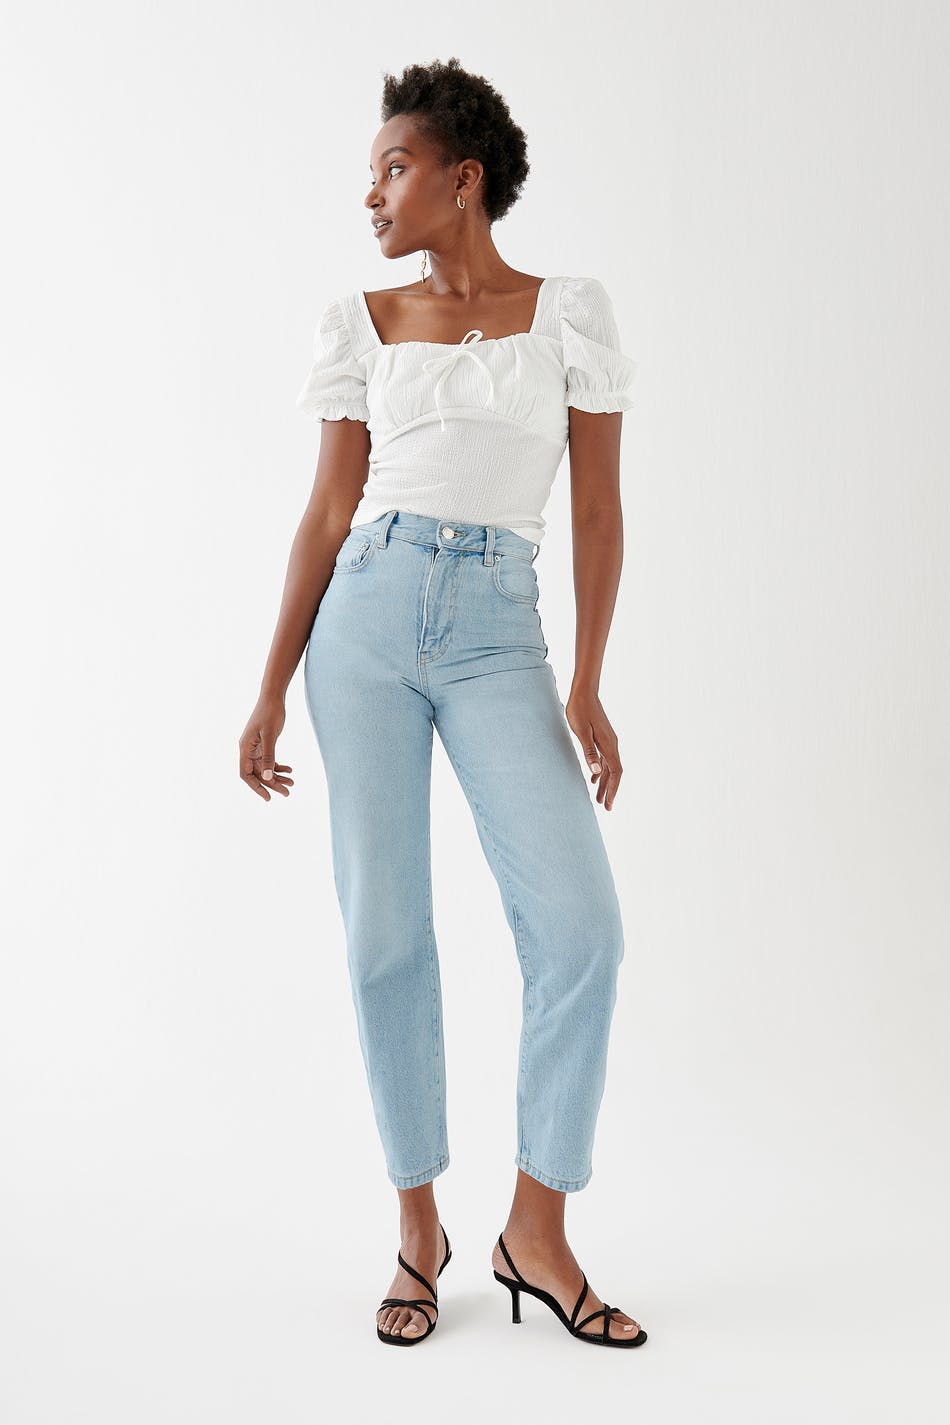 Prøve Åre kimplante Relaxed Mom Jeans Gina Tricot new Zealand, SAVE 46% - mpgc.net